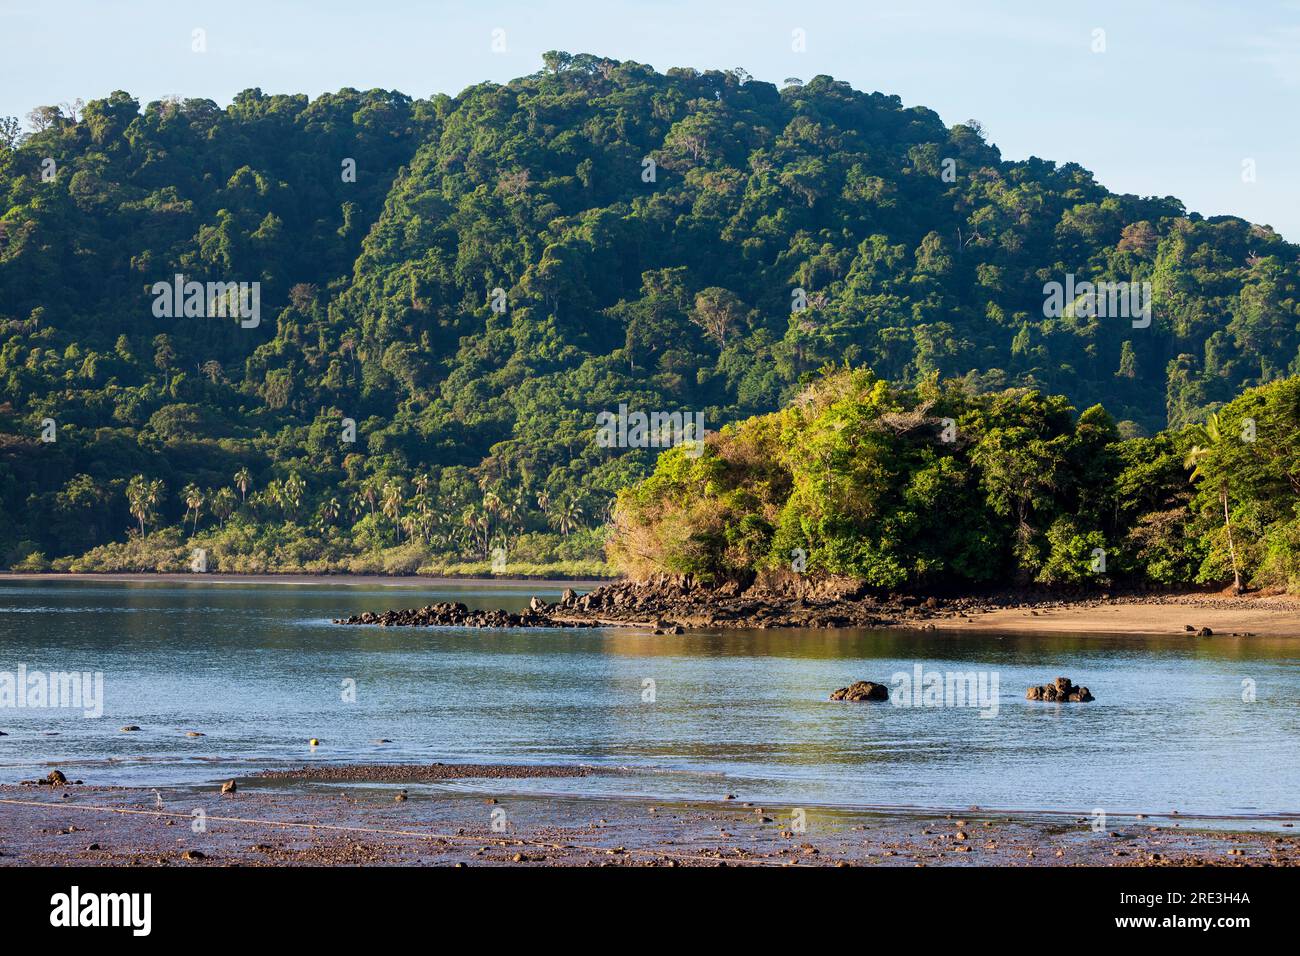 Eary morning sunlight at the northeastern side of Coiba Island, Pacific coast, Veraguas province, Republic of Panama, Central America. Stock Photo